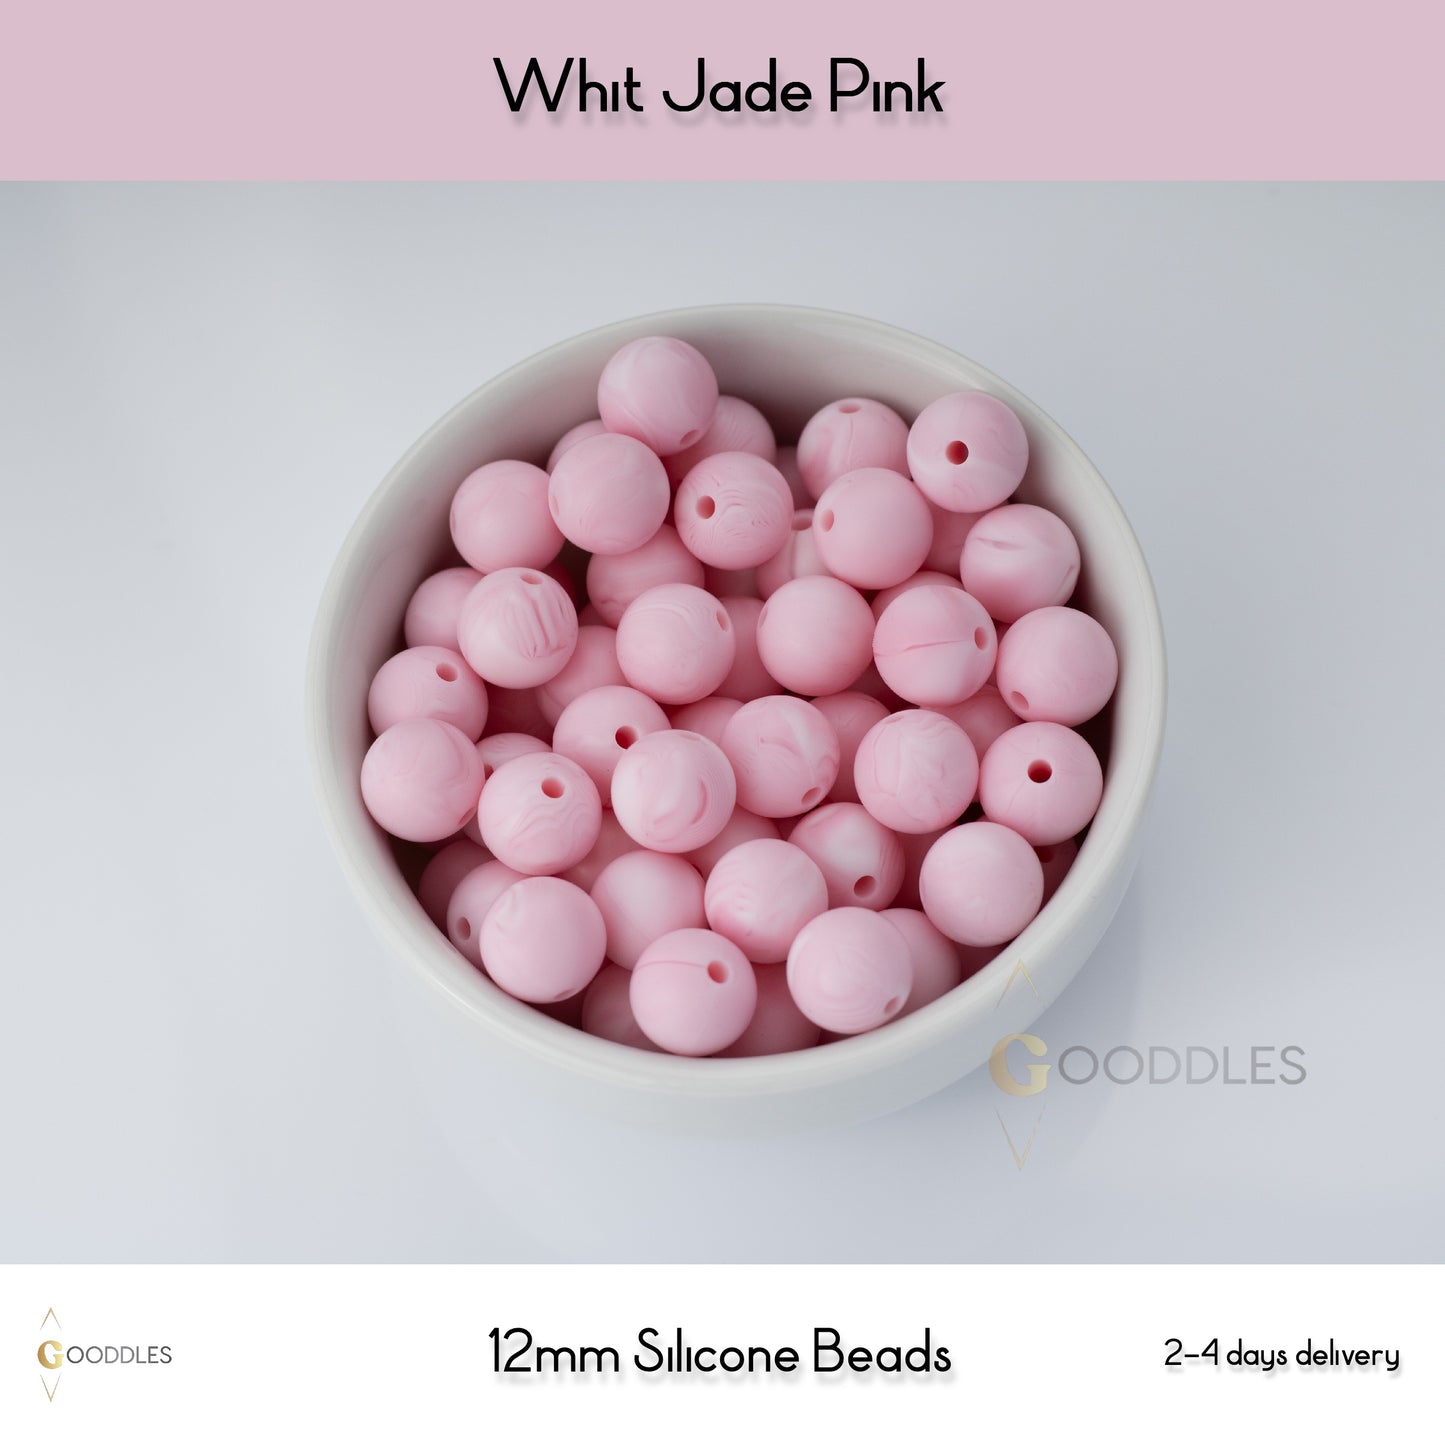 5pcs, Whit Jade Pink Silicone Beads Round Silicone Beads